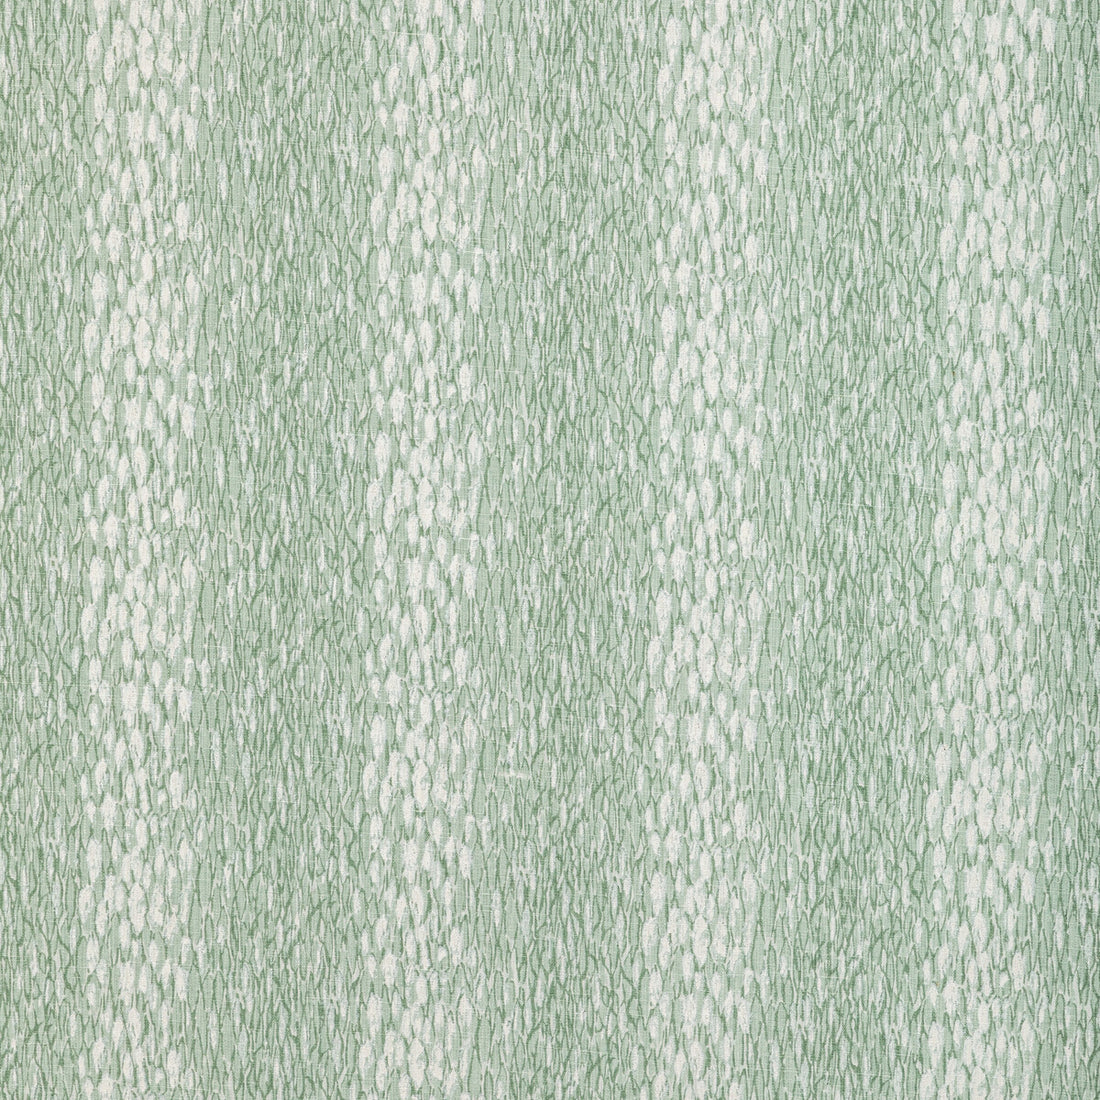 Chromis fabric in jade color - pattern CHROMIS.3.0 - by Kravet Basics in the Jeffrey Alan Marks Seascapes collection